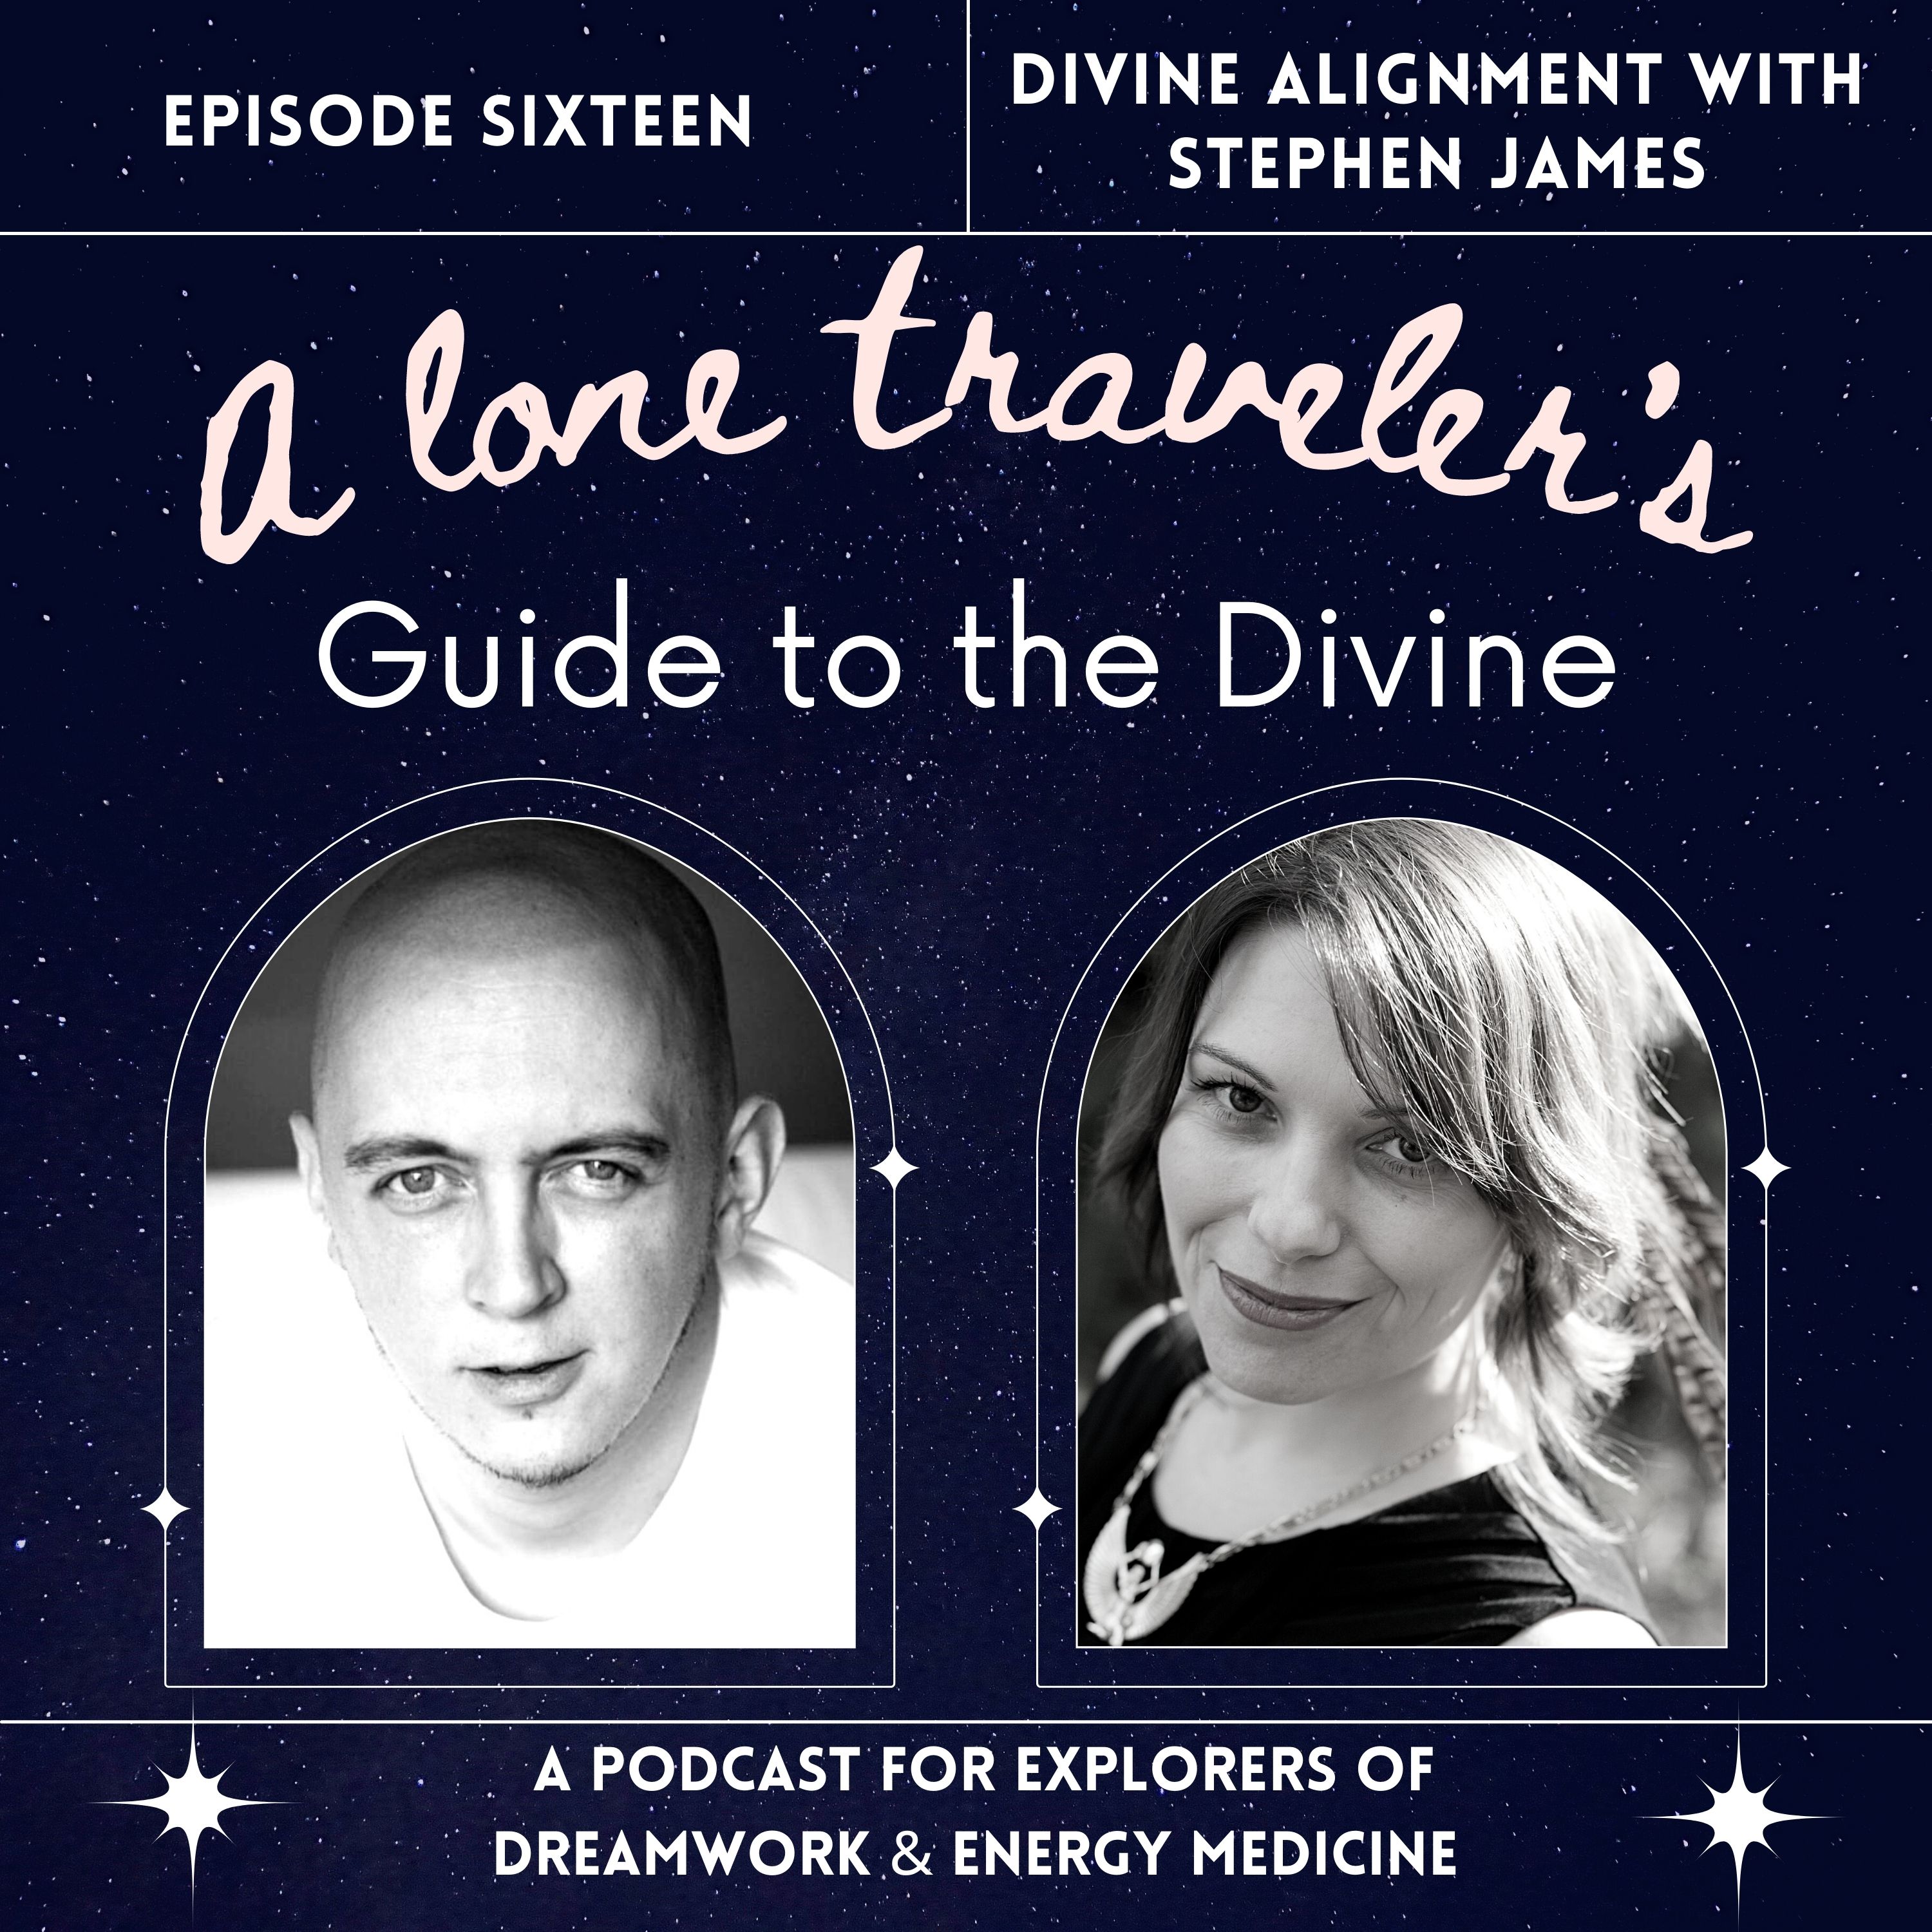 Artwork for podcast A Lone Traveler's Guide to the Divine